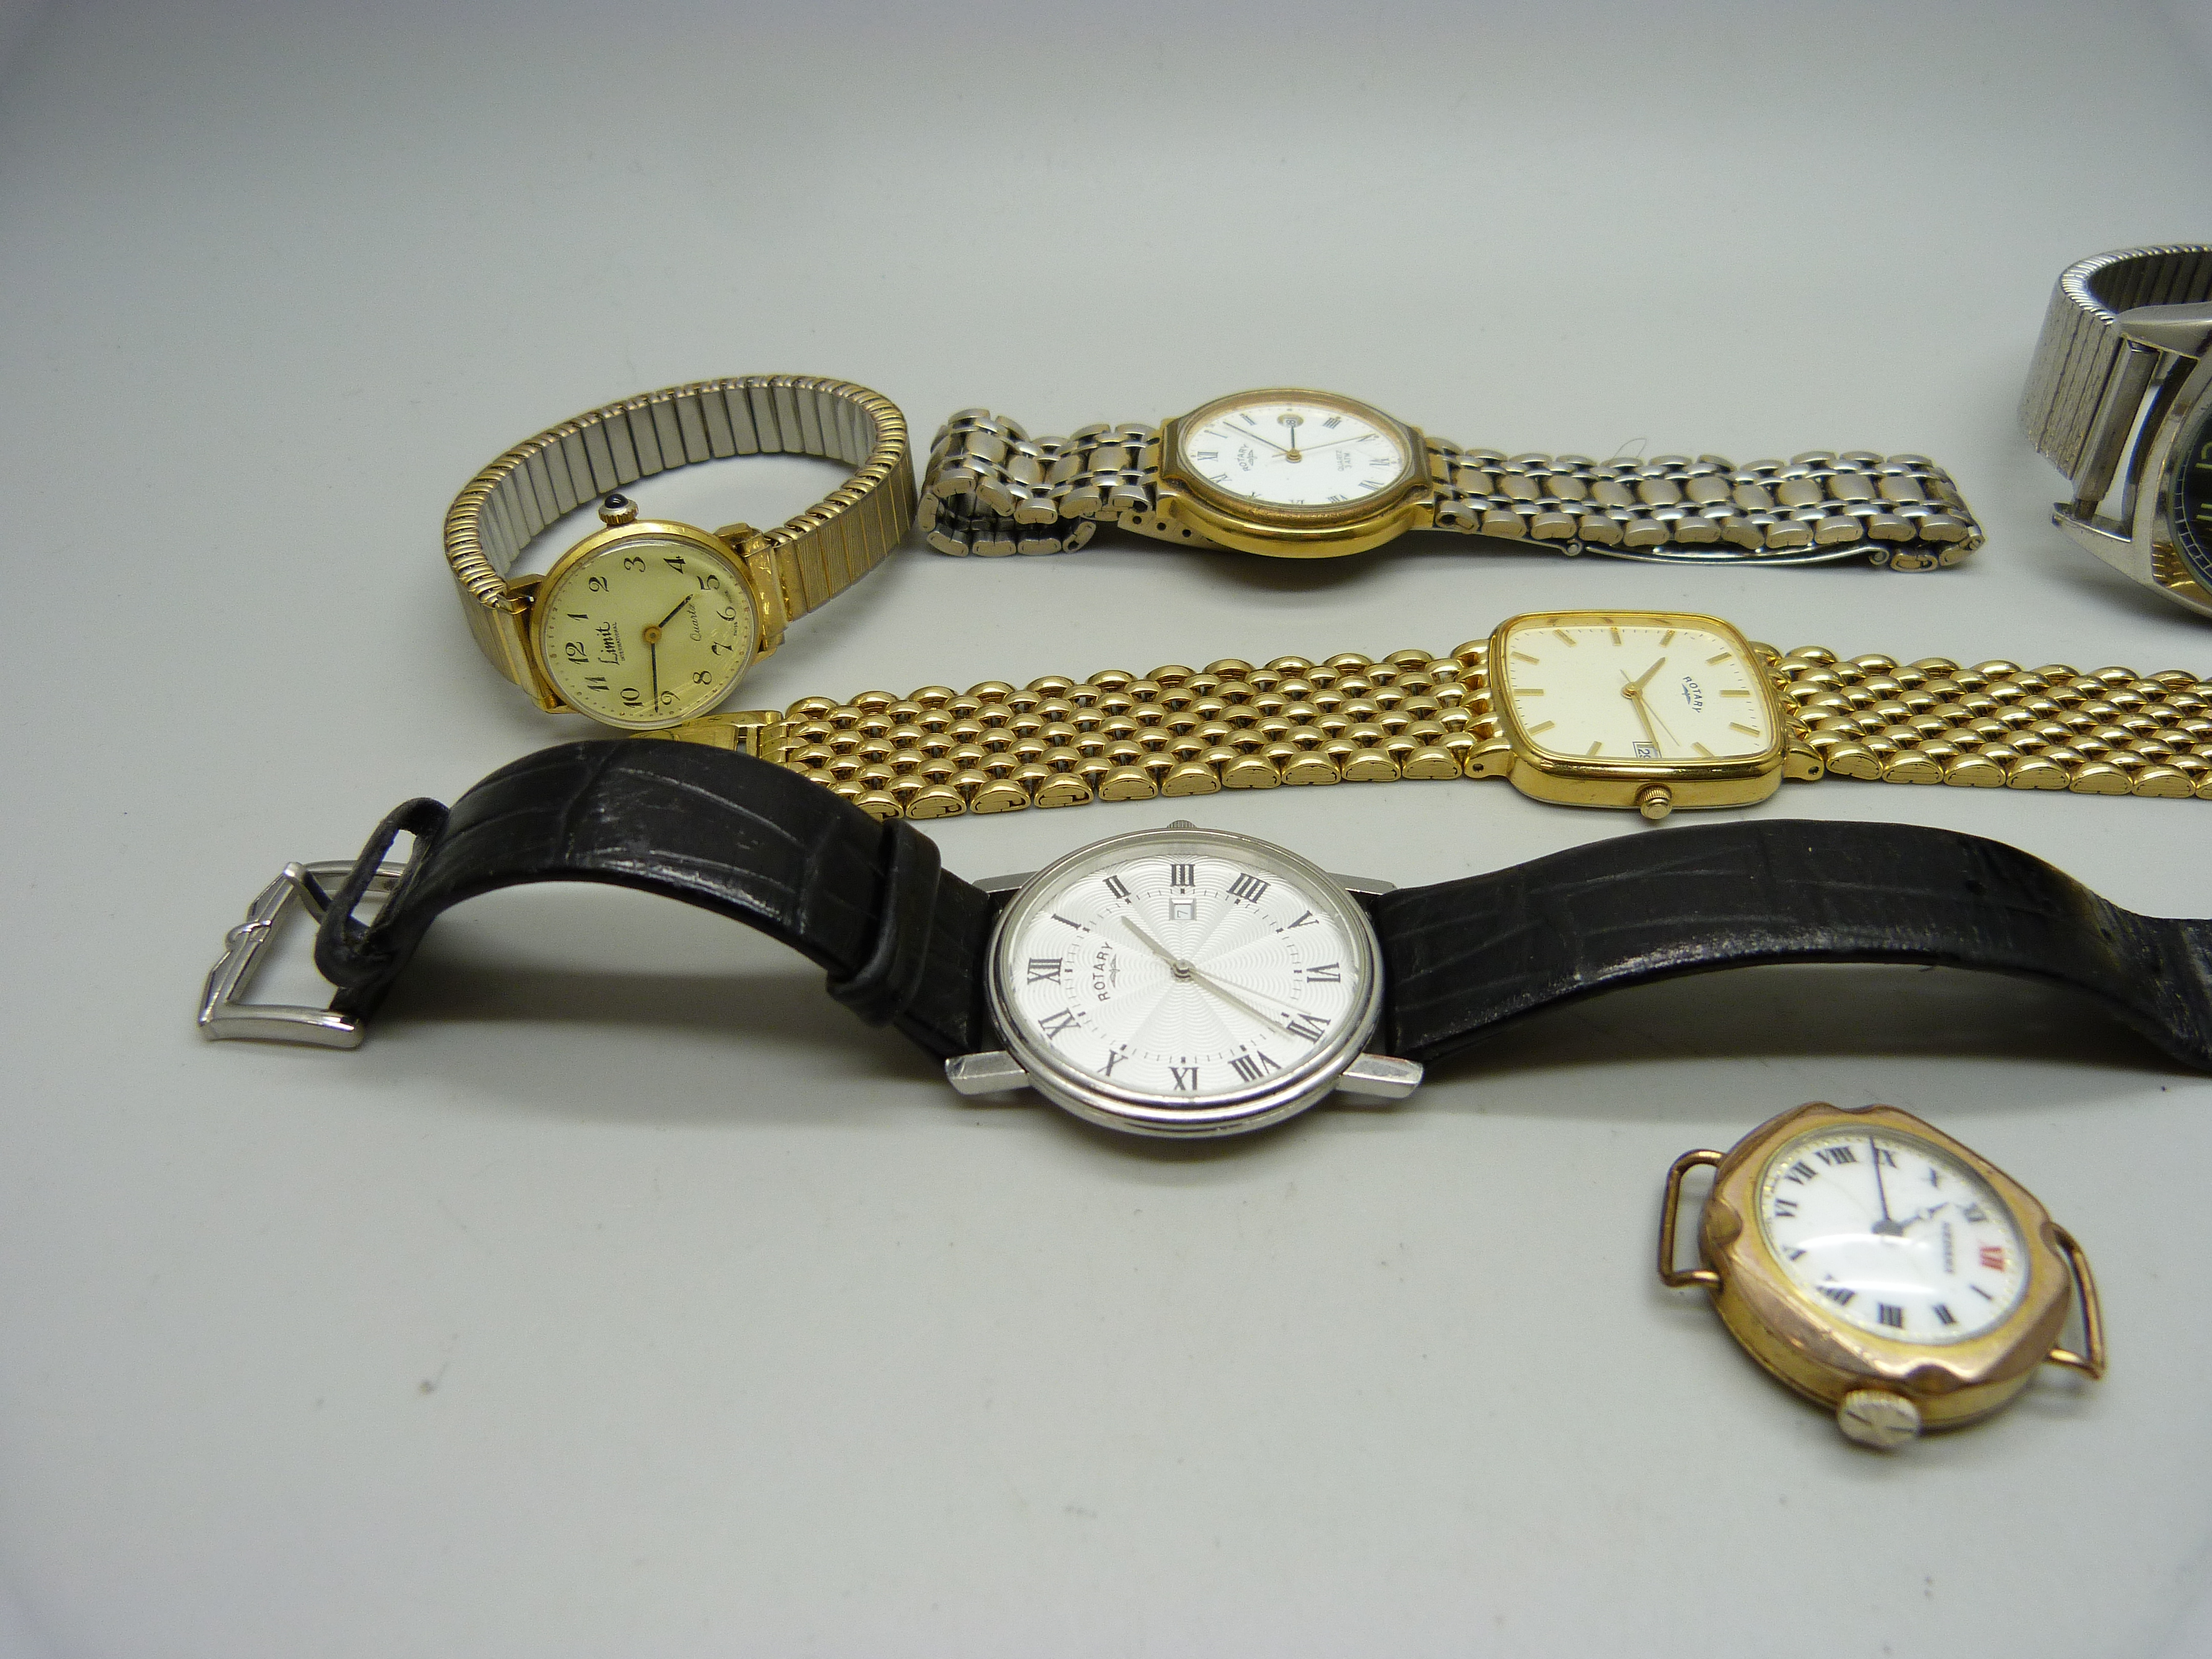 A collection of lady's and gentleman's wristwatches including Limit and Rotary - Image 3 of 4